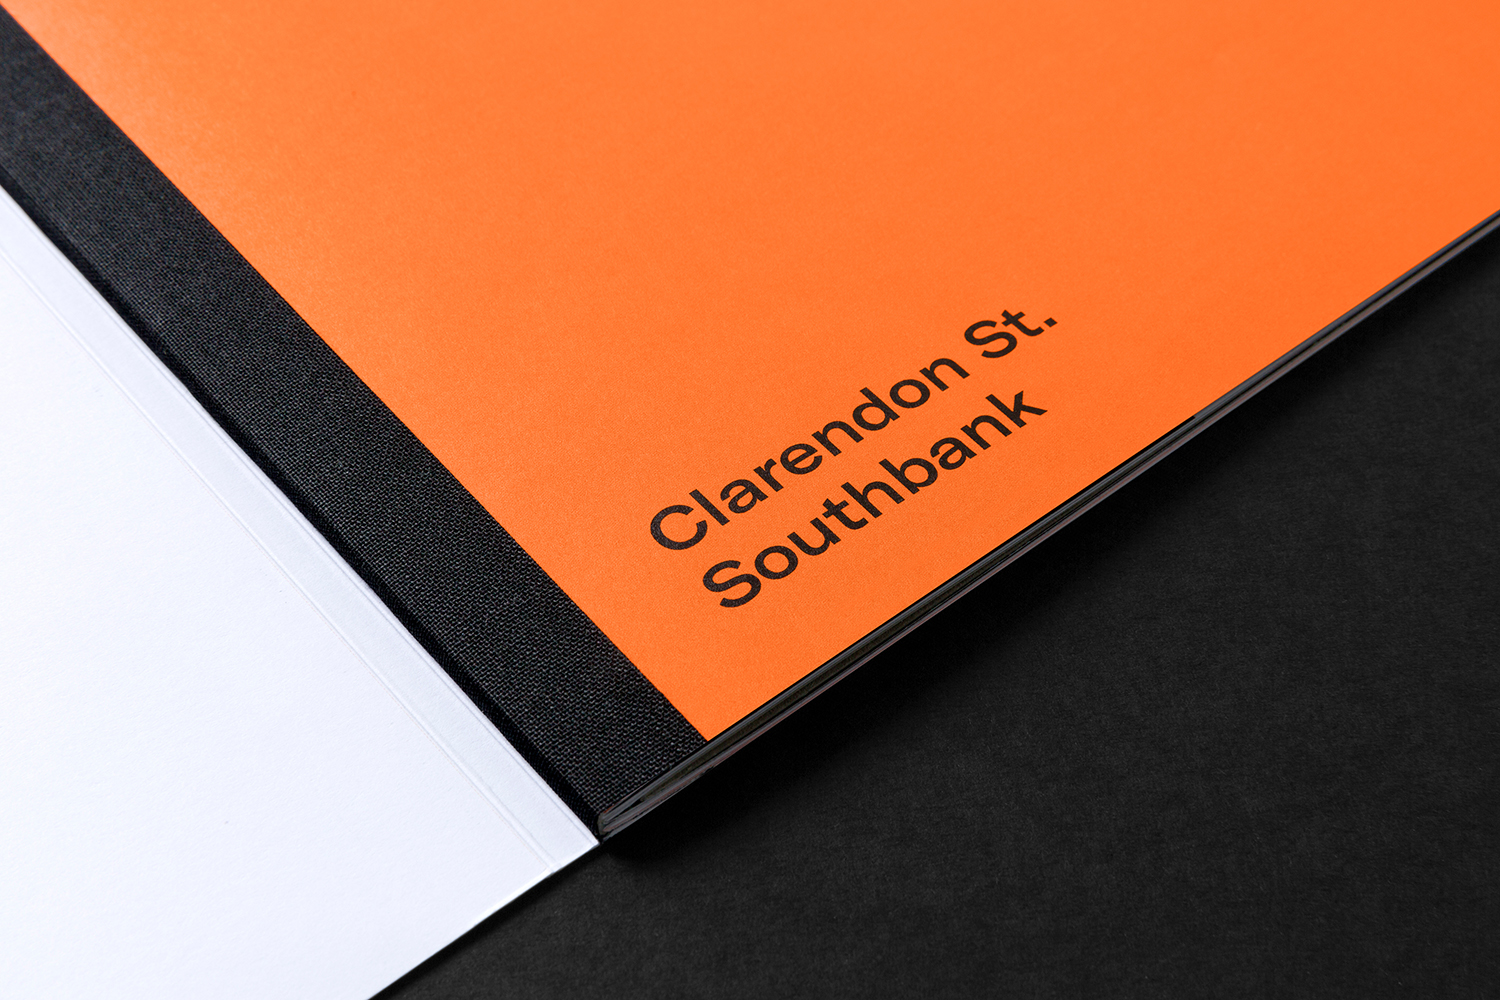 Brand identity and brochure design for Melbourne-based modern workspace OneFourFive Clarendon designed by Studio Brave